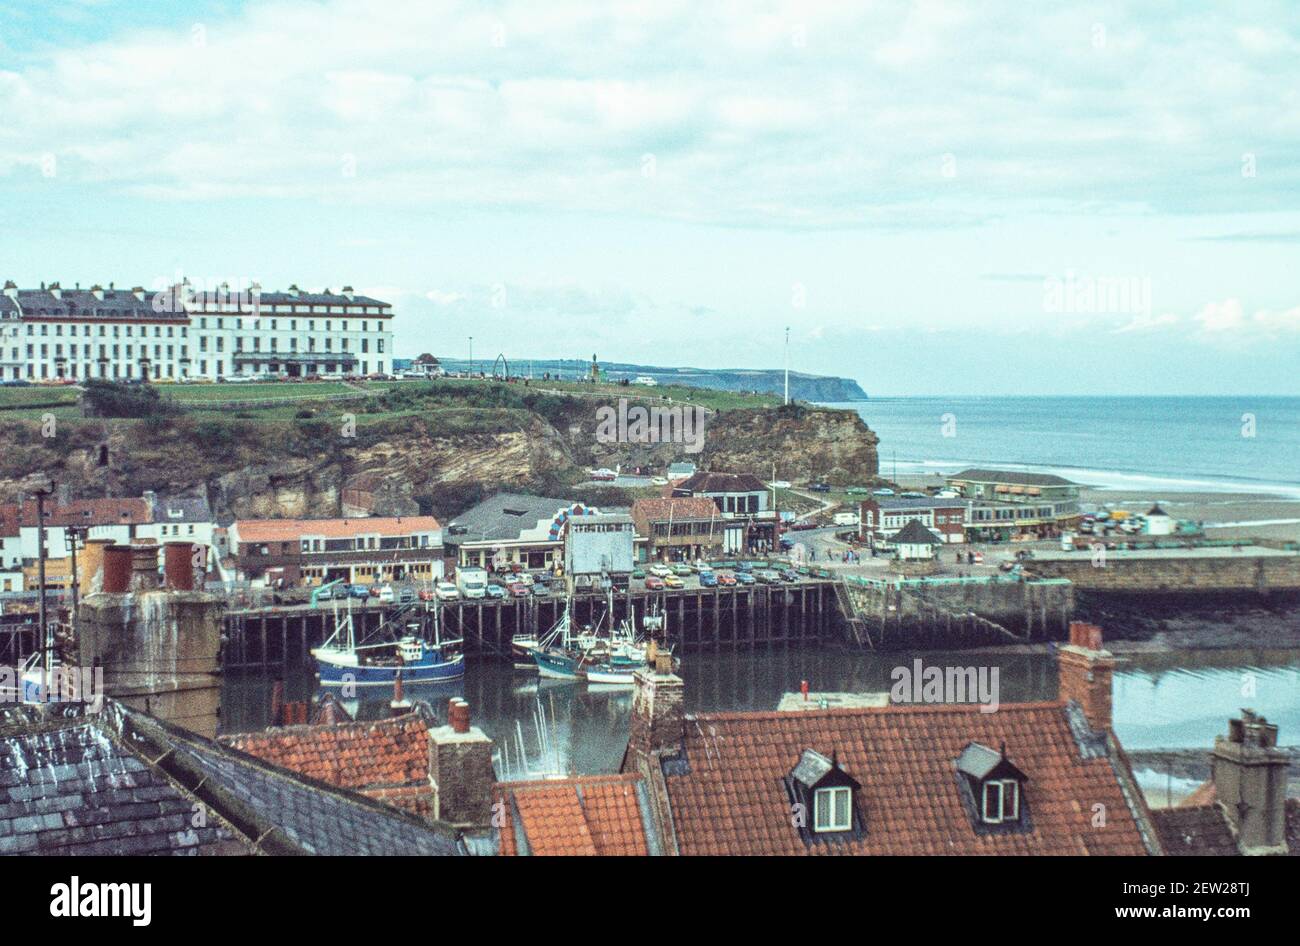 1978 - Whitby Yorkshire -  Whitby west cliff and New town above the harbour with fishing boats moored at the quayside and fish dock Whitby North Yorkshire England UK GB Europe Stock Photo